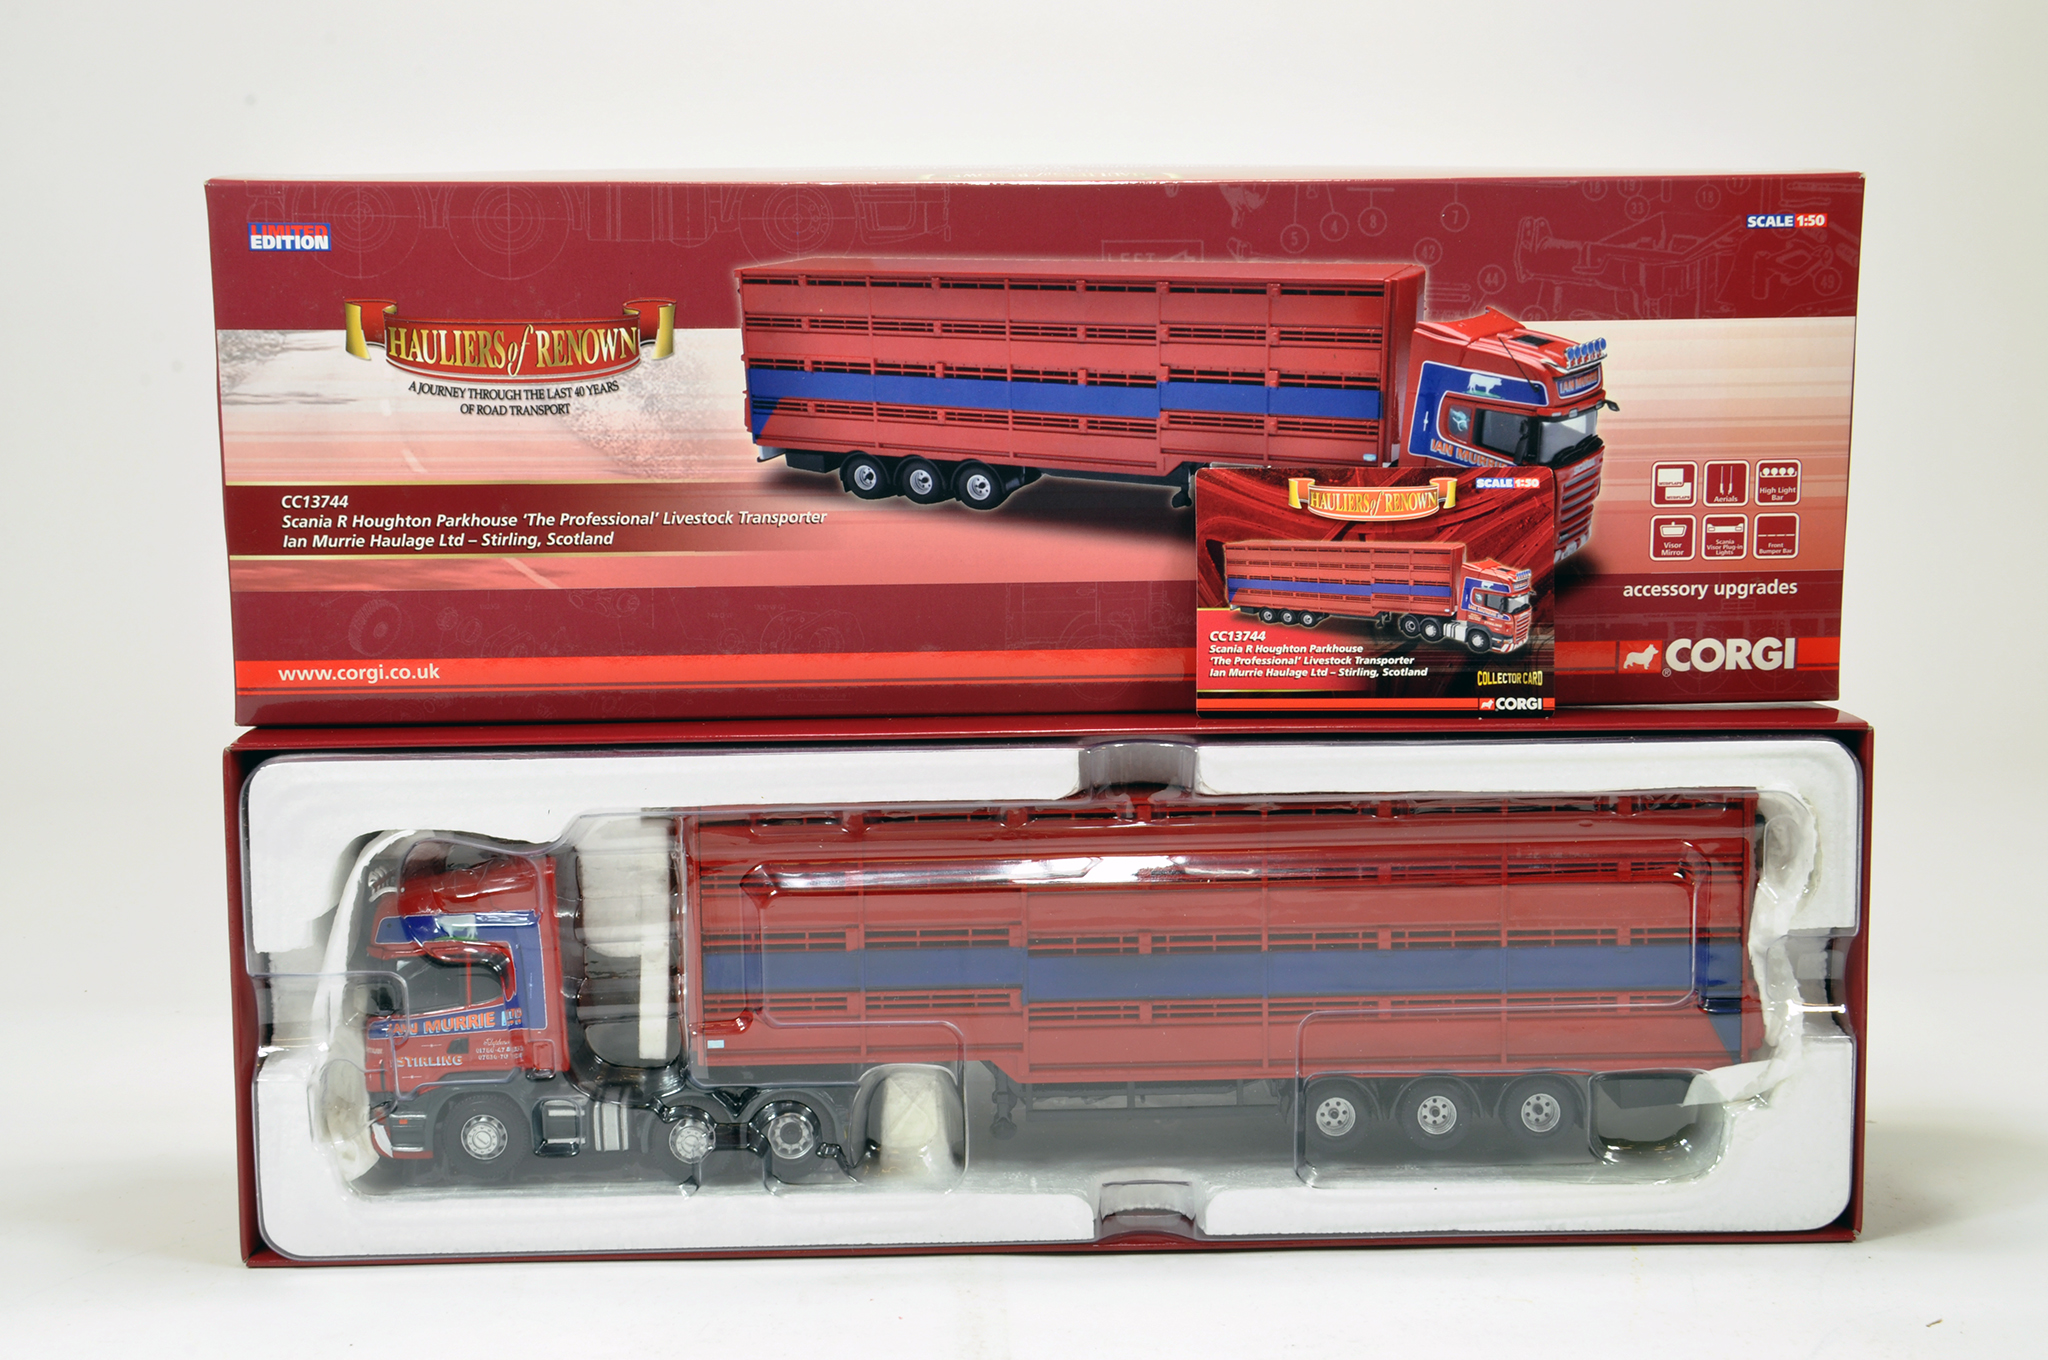 Corgi Diecast Truck Issue comprising No. CC13744 Scania R livestock transporter. In the livery of